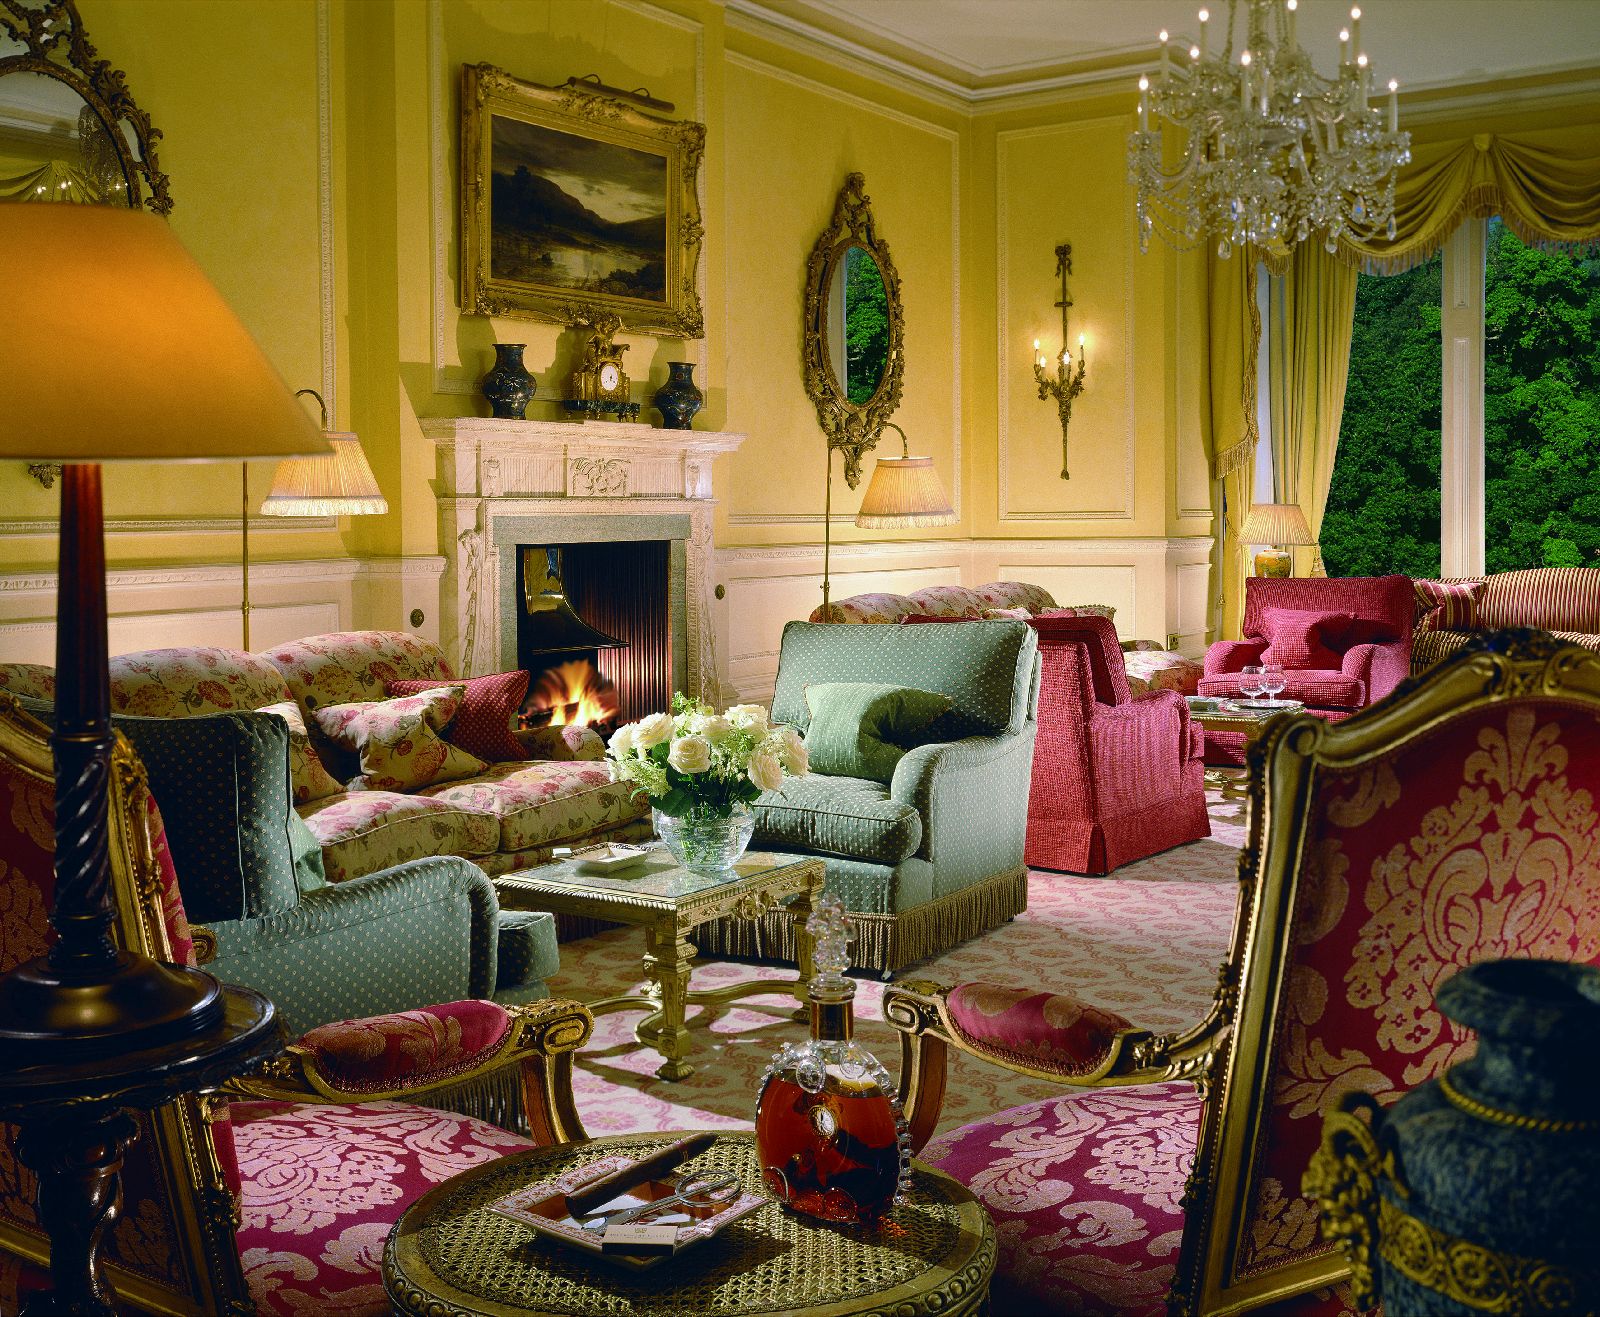 Cosy guest lounge at the Inverlochy Castle Hotel in Scotland